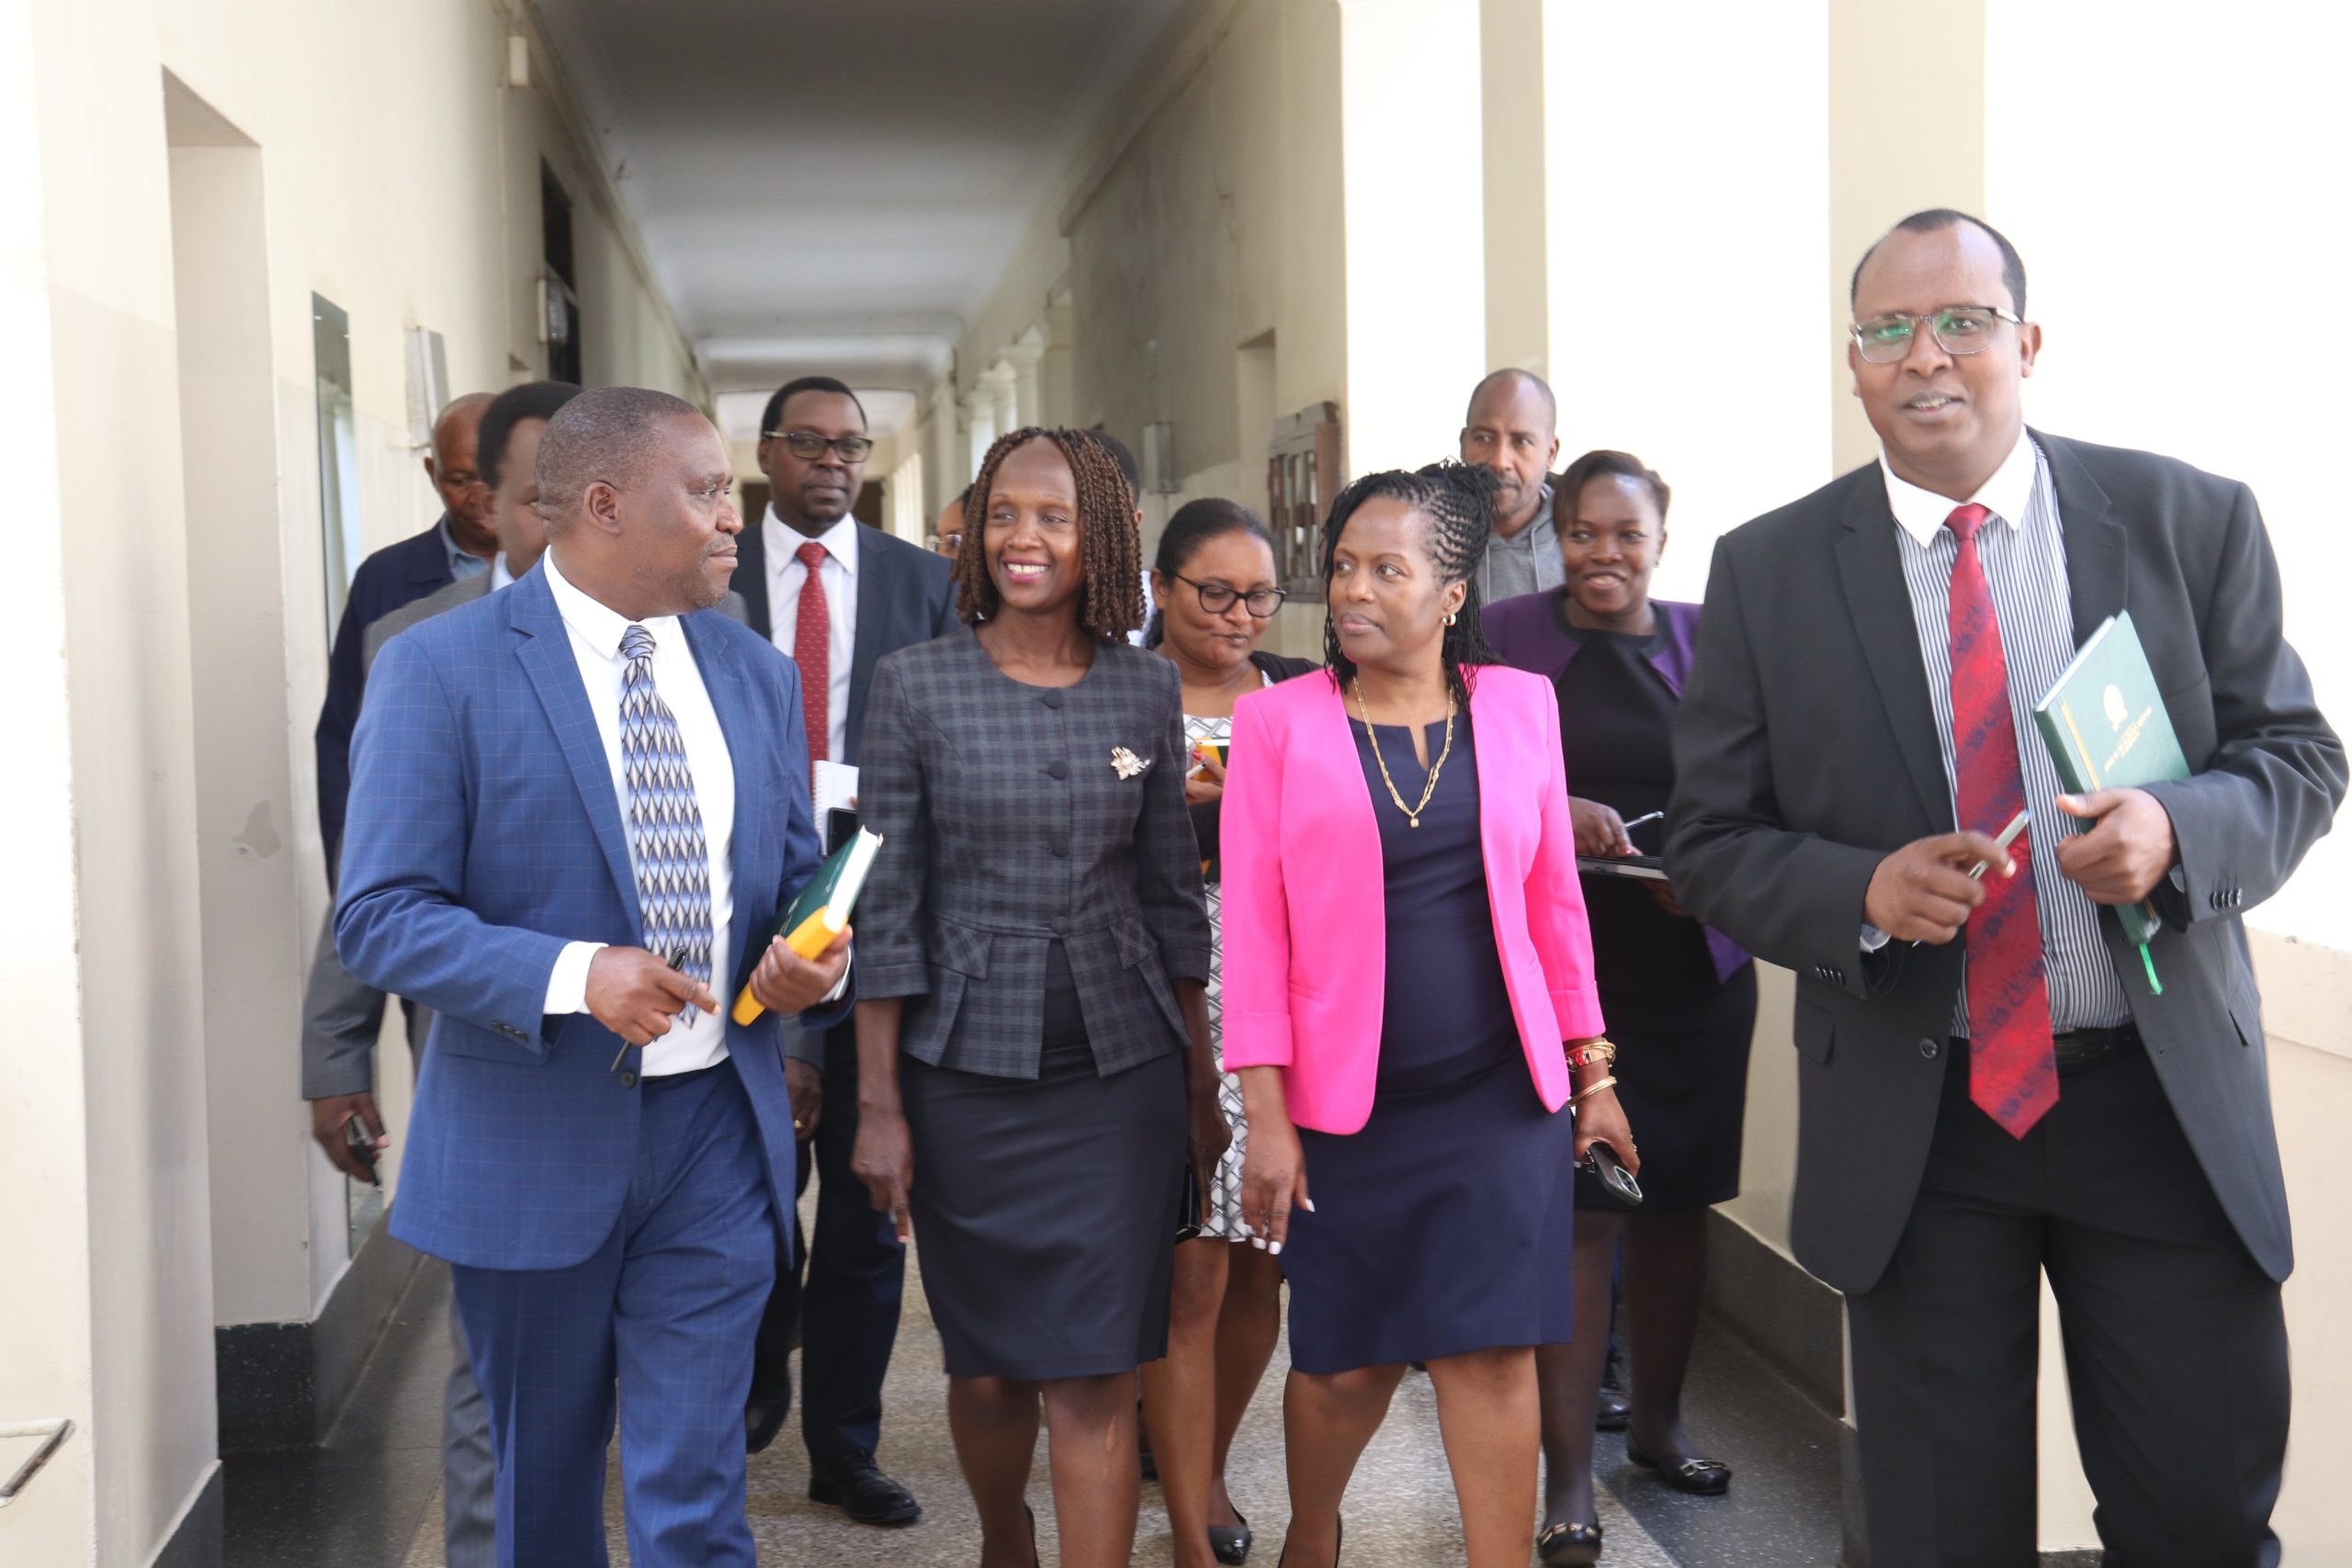 CRJ Mokaya interacts with staff during familiarization tour of the Supreme Court